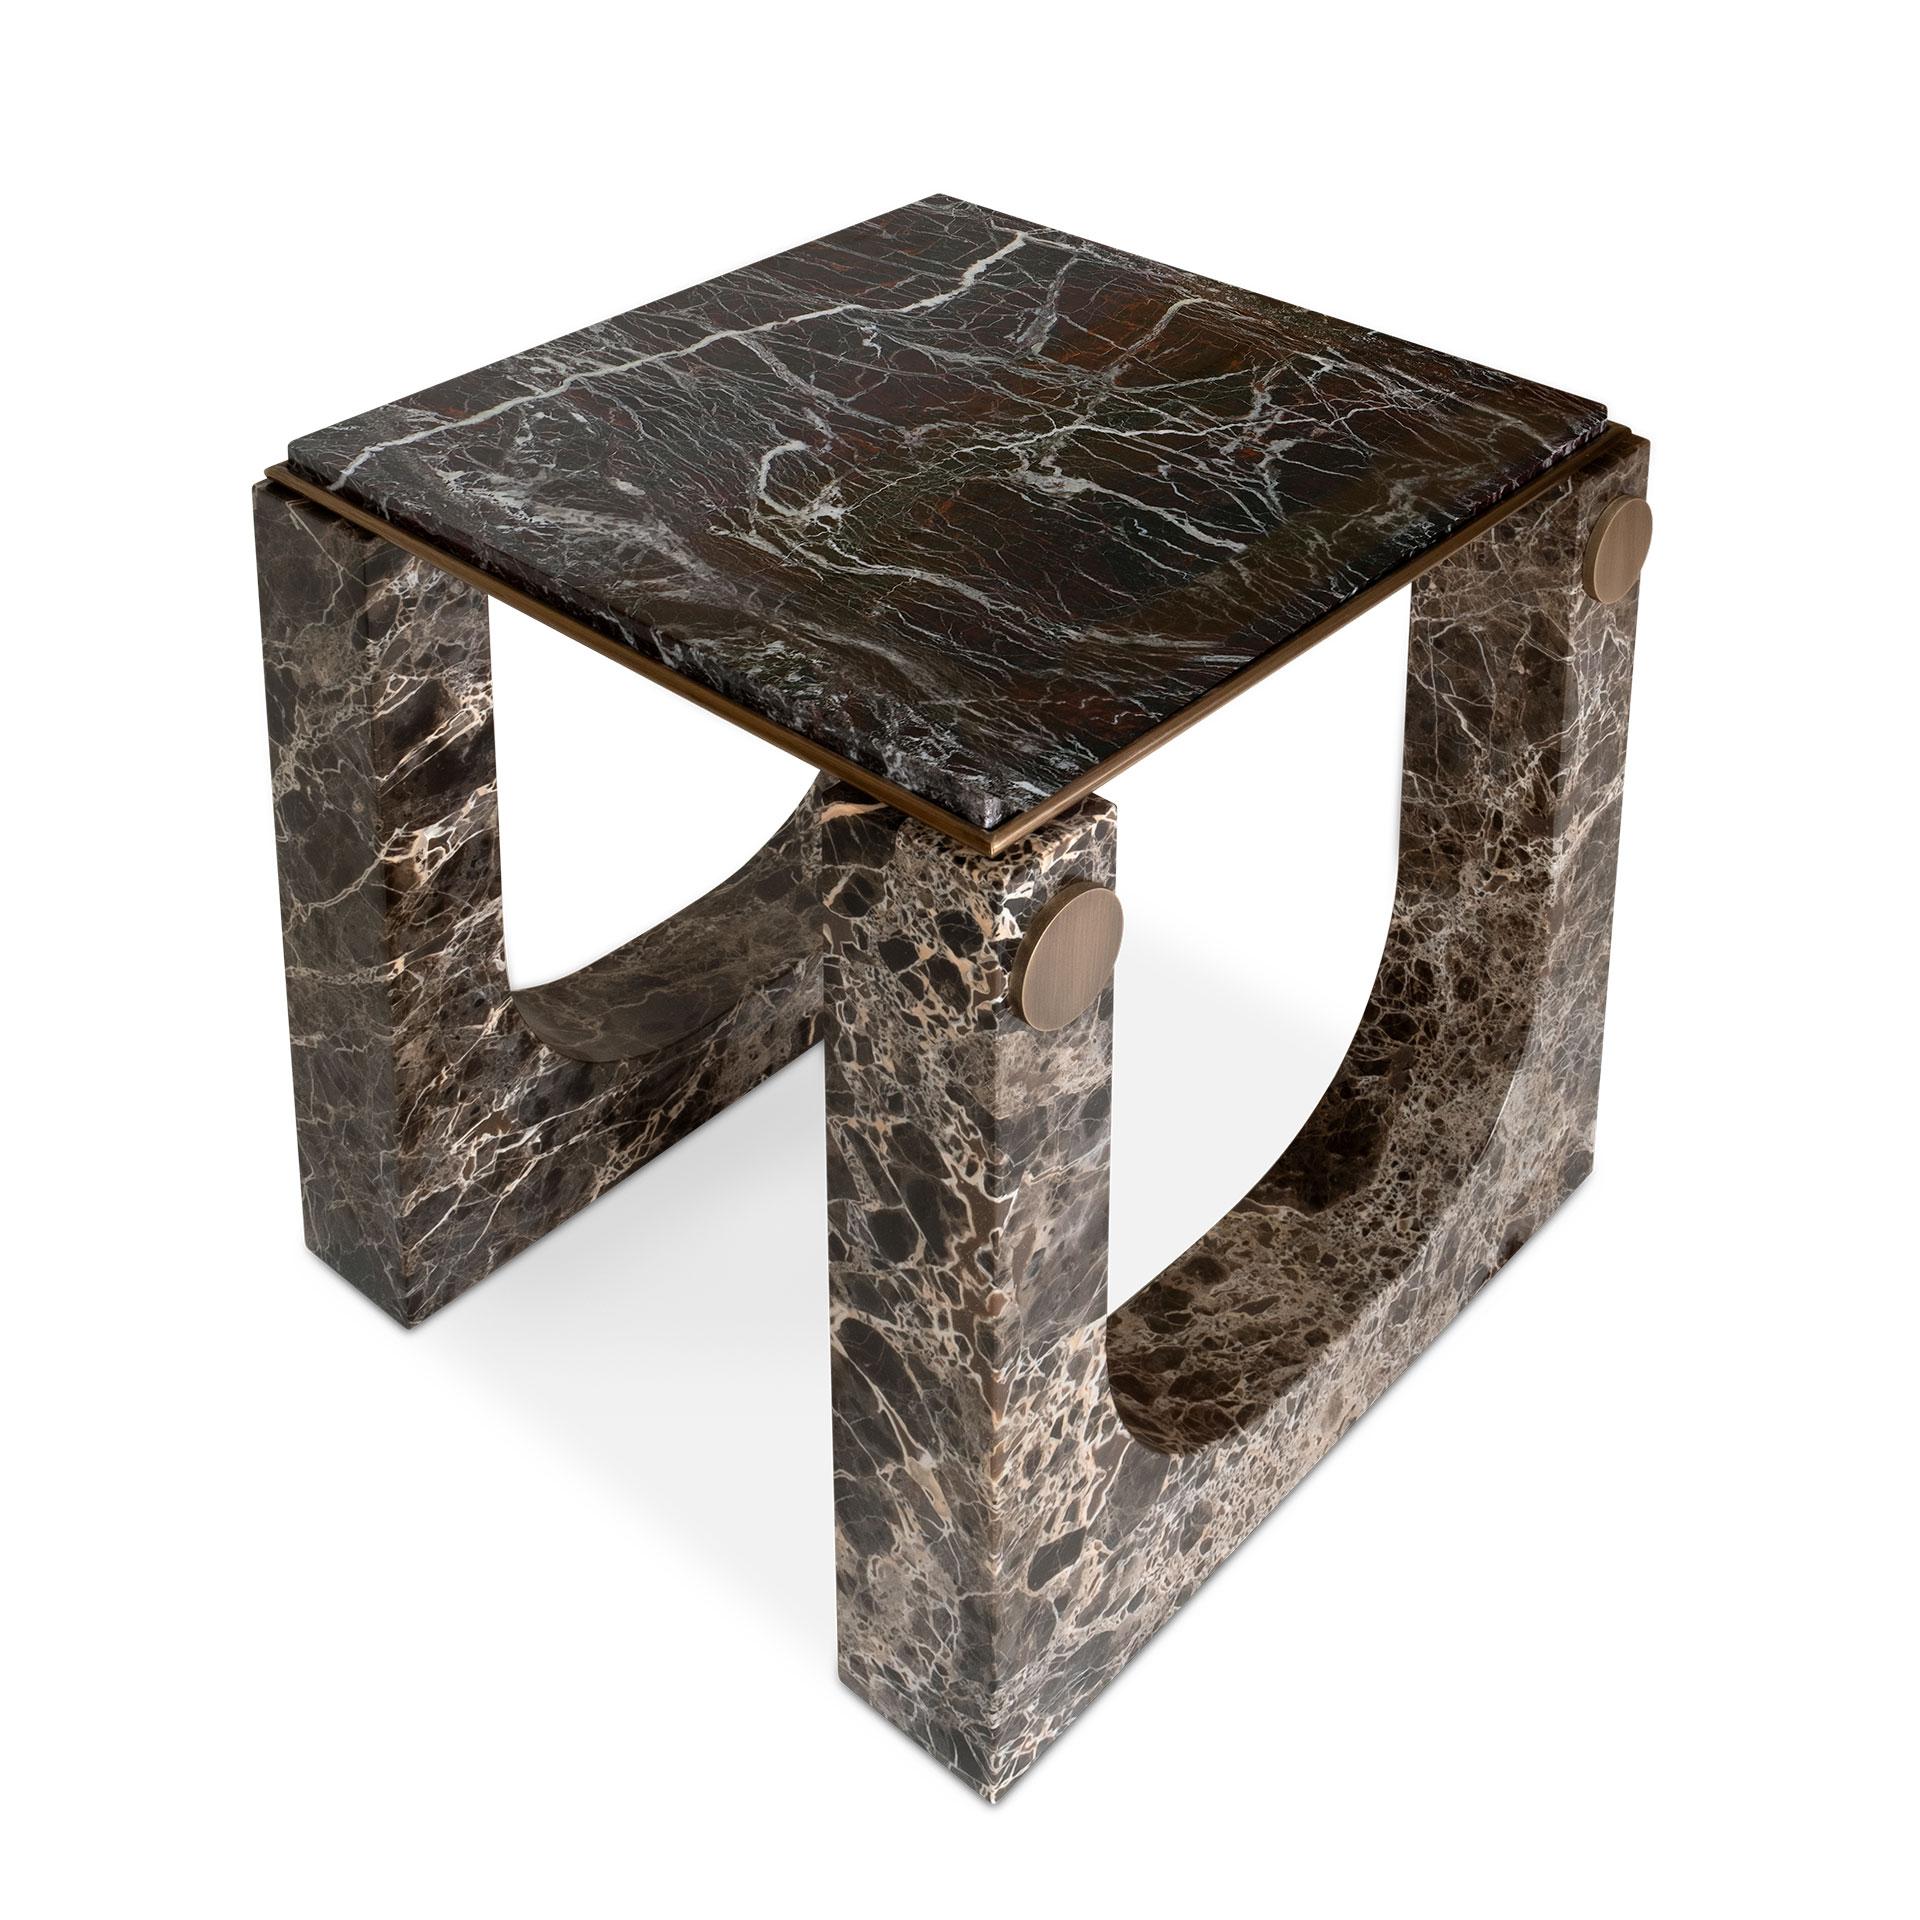 The Lincoln side table is an imposing and modern furniture piece that honors the renowned Lincoln Memorial. The Lincoln Memorial was built to glorify Abraham Lincoln, the 16th president of the United States. Inspired by such a national landmark,